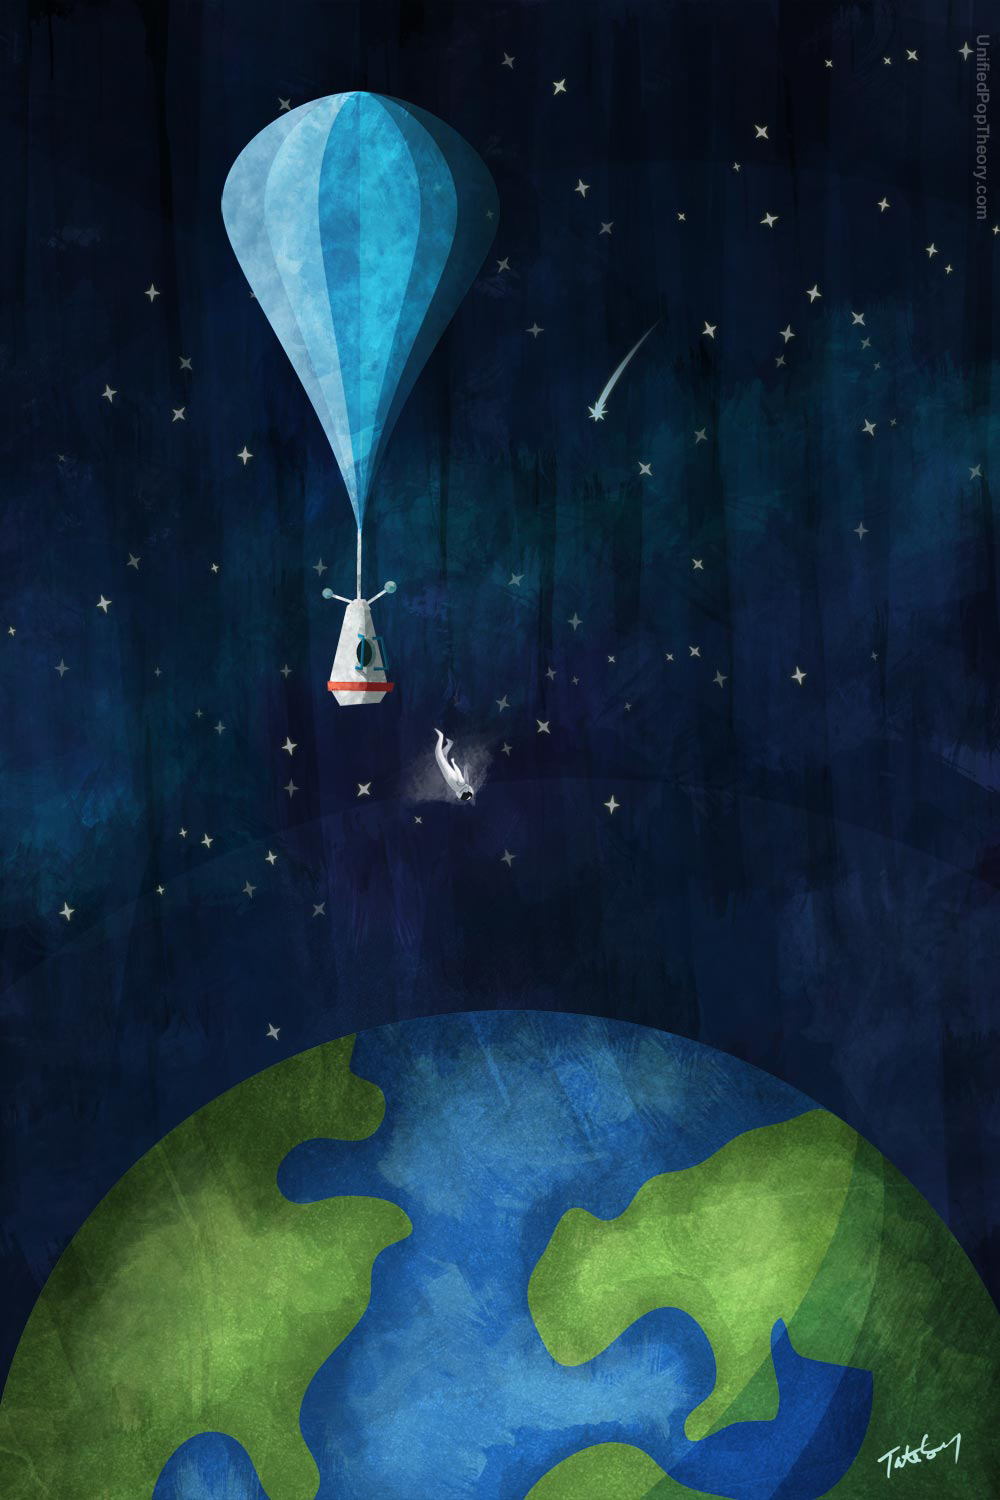 Returning from the Edge of Space, A Tribute to Felix Baumgartner